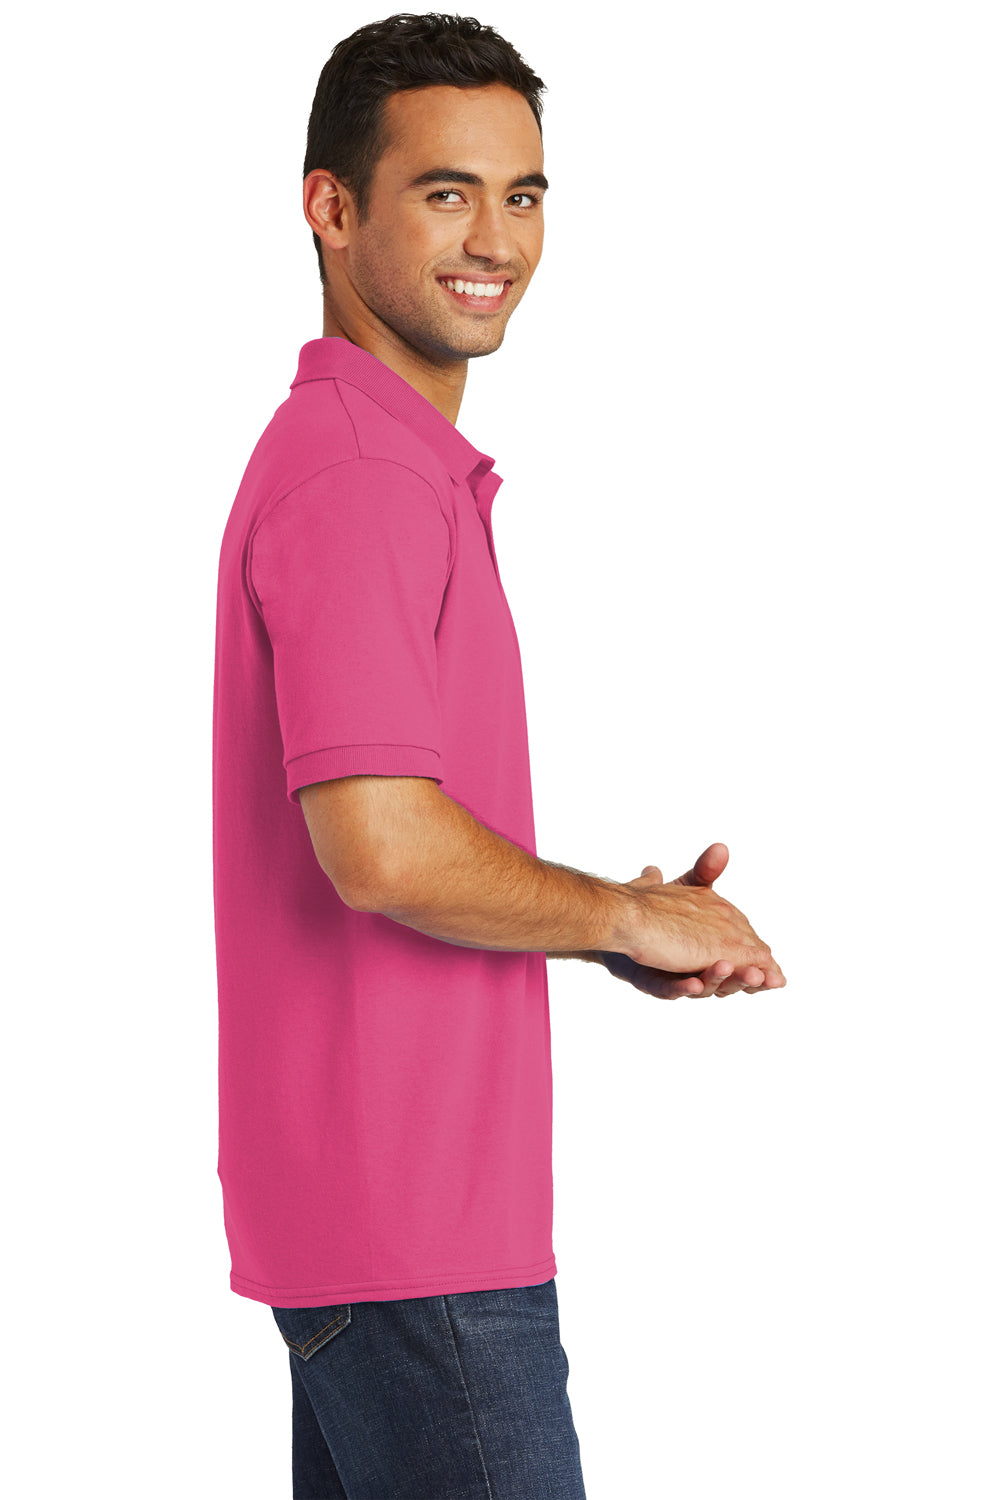 Port & Company KP55 Mens Core Stain Resistant Short Sleeve Polo Shirt Sangria Pink Side